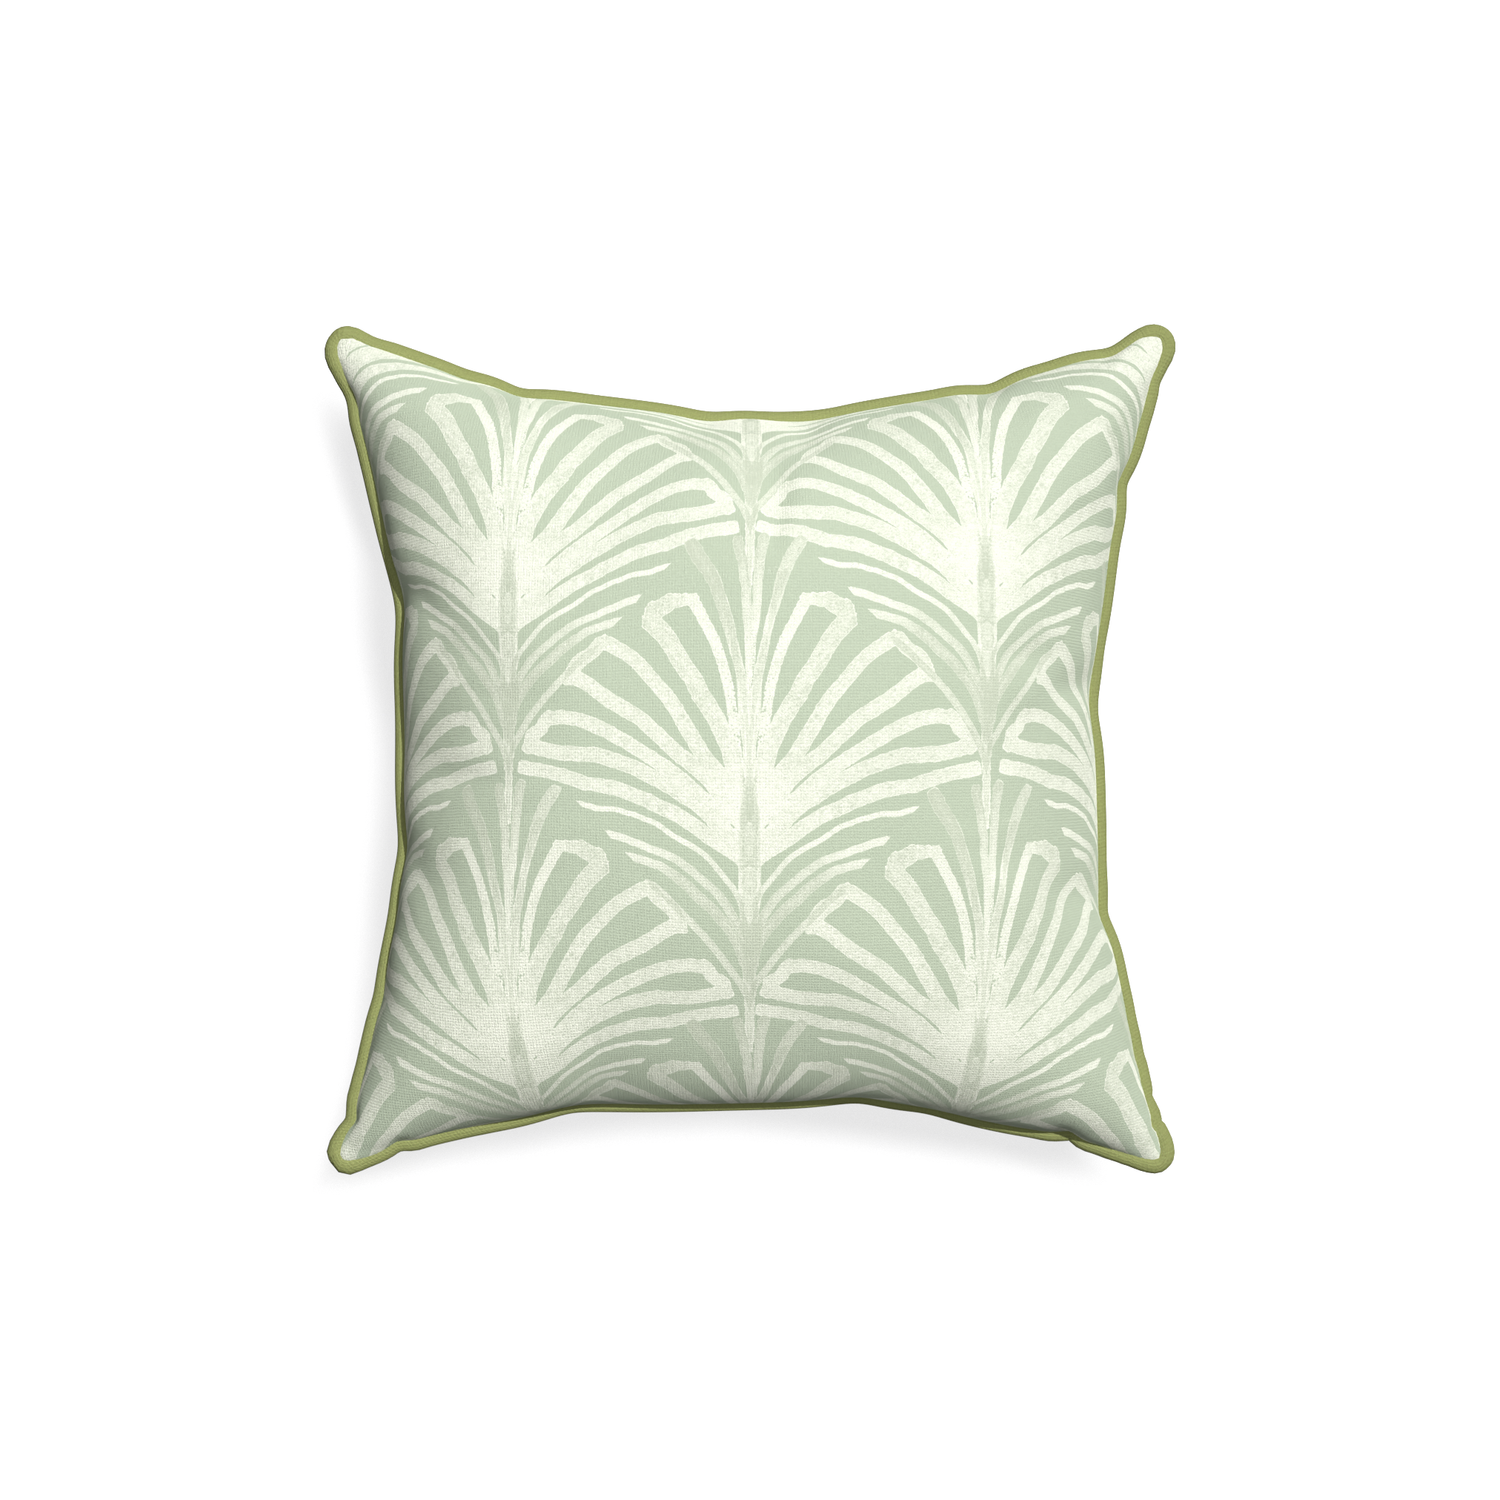 18-square suzy sage custom pillow with moss piping on white background